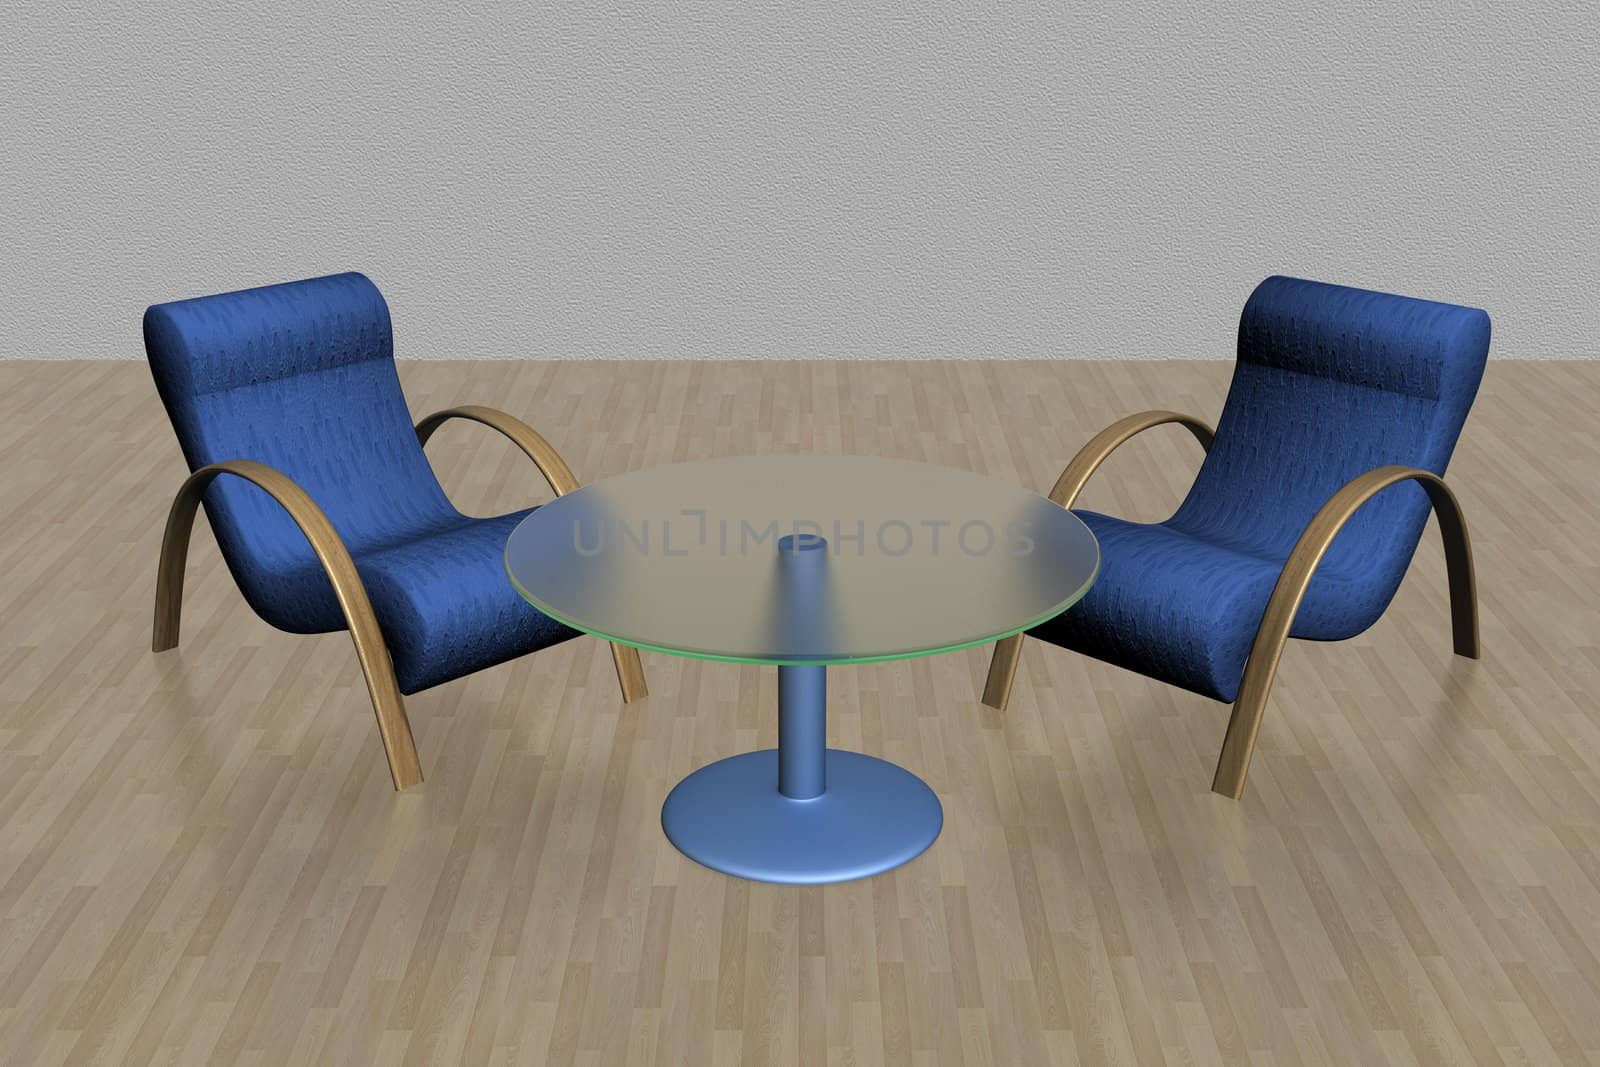 Two armchairs and glass table. 3D image.